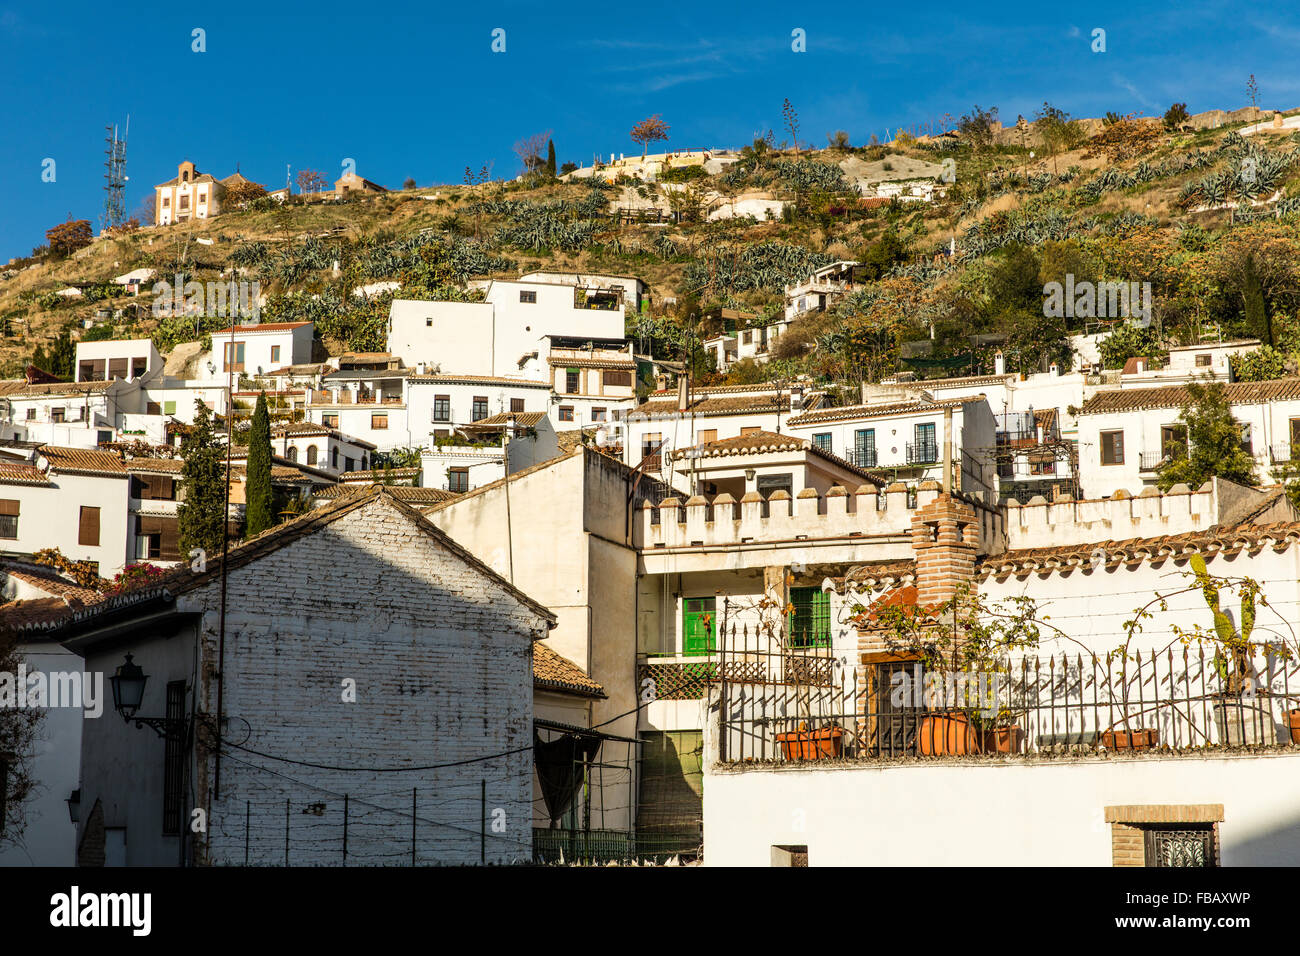 View of the Sacromonte area of Granada inhabited by Spanish gypsie with cactus plants white houses and caves visible Stock Photo